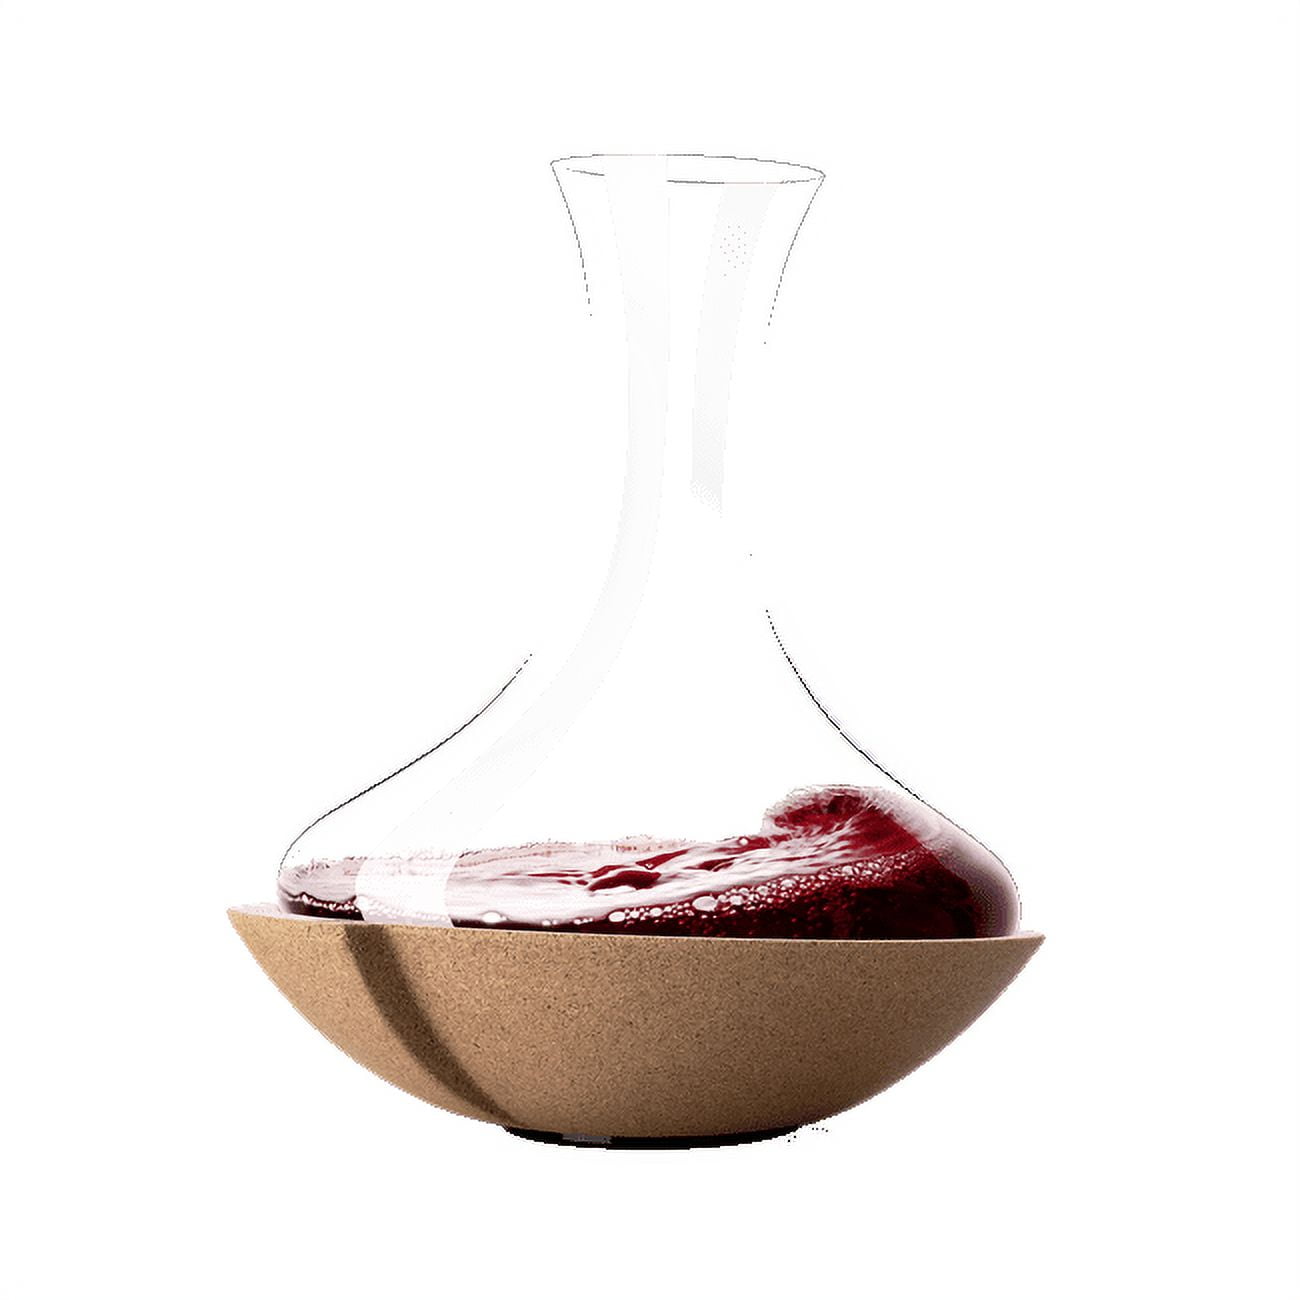 Decanter vs. Carafe: What's the Difference?